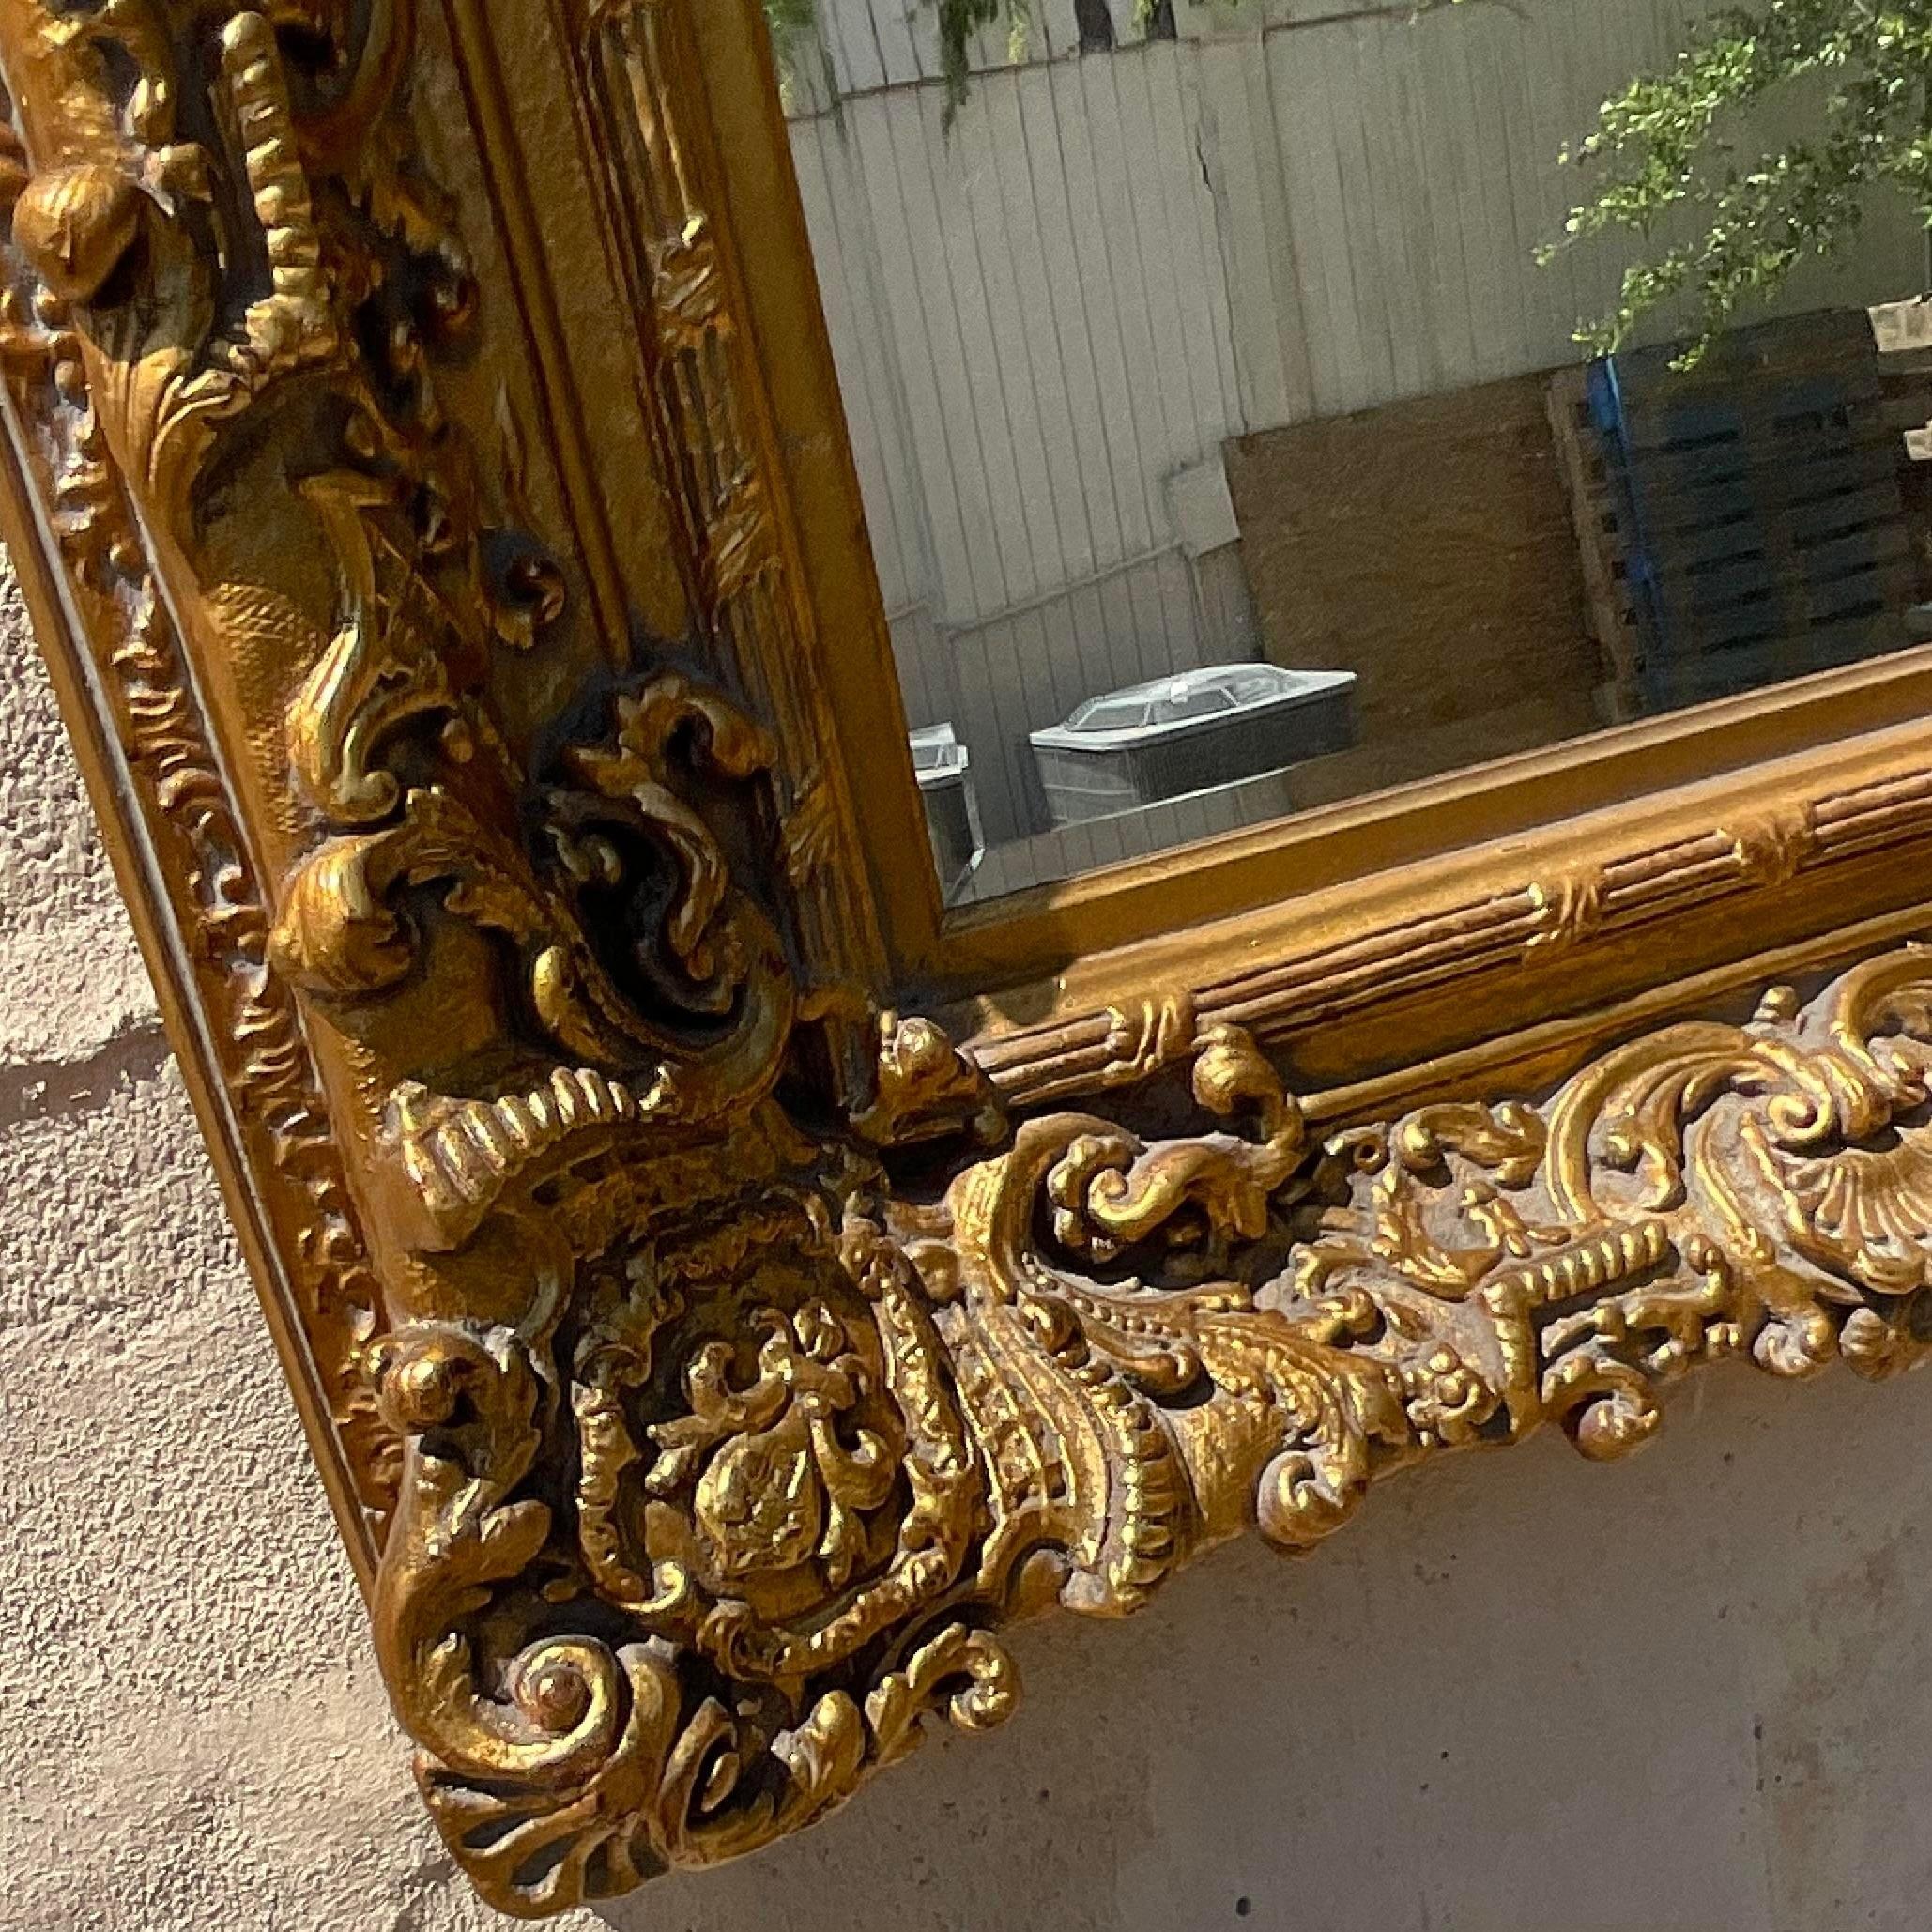 Indulge in timeless luxury with our Vintage Regency Carved Gilt Wood Mirror. American-crafted, this mirror showcases exquisite gilt wood carving, blending classic Regency elegance with artistic craftsmanship for a lavish and elegant addition to any